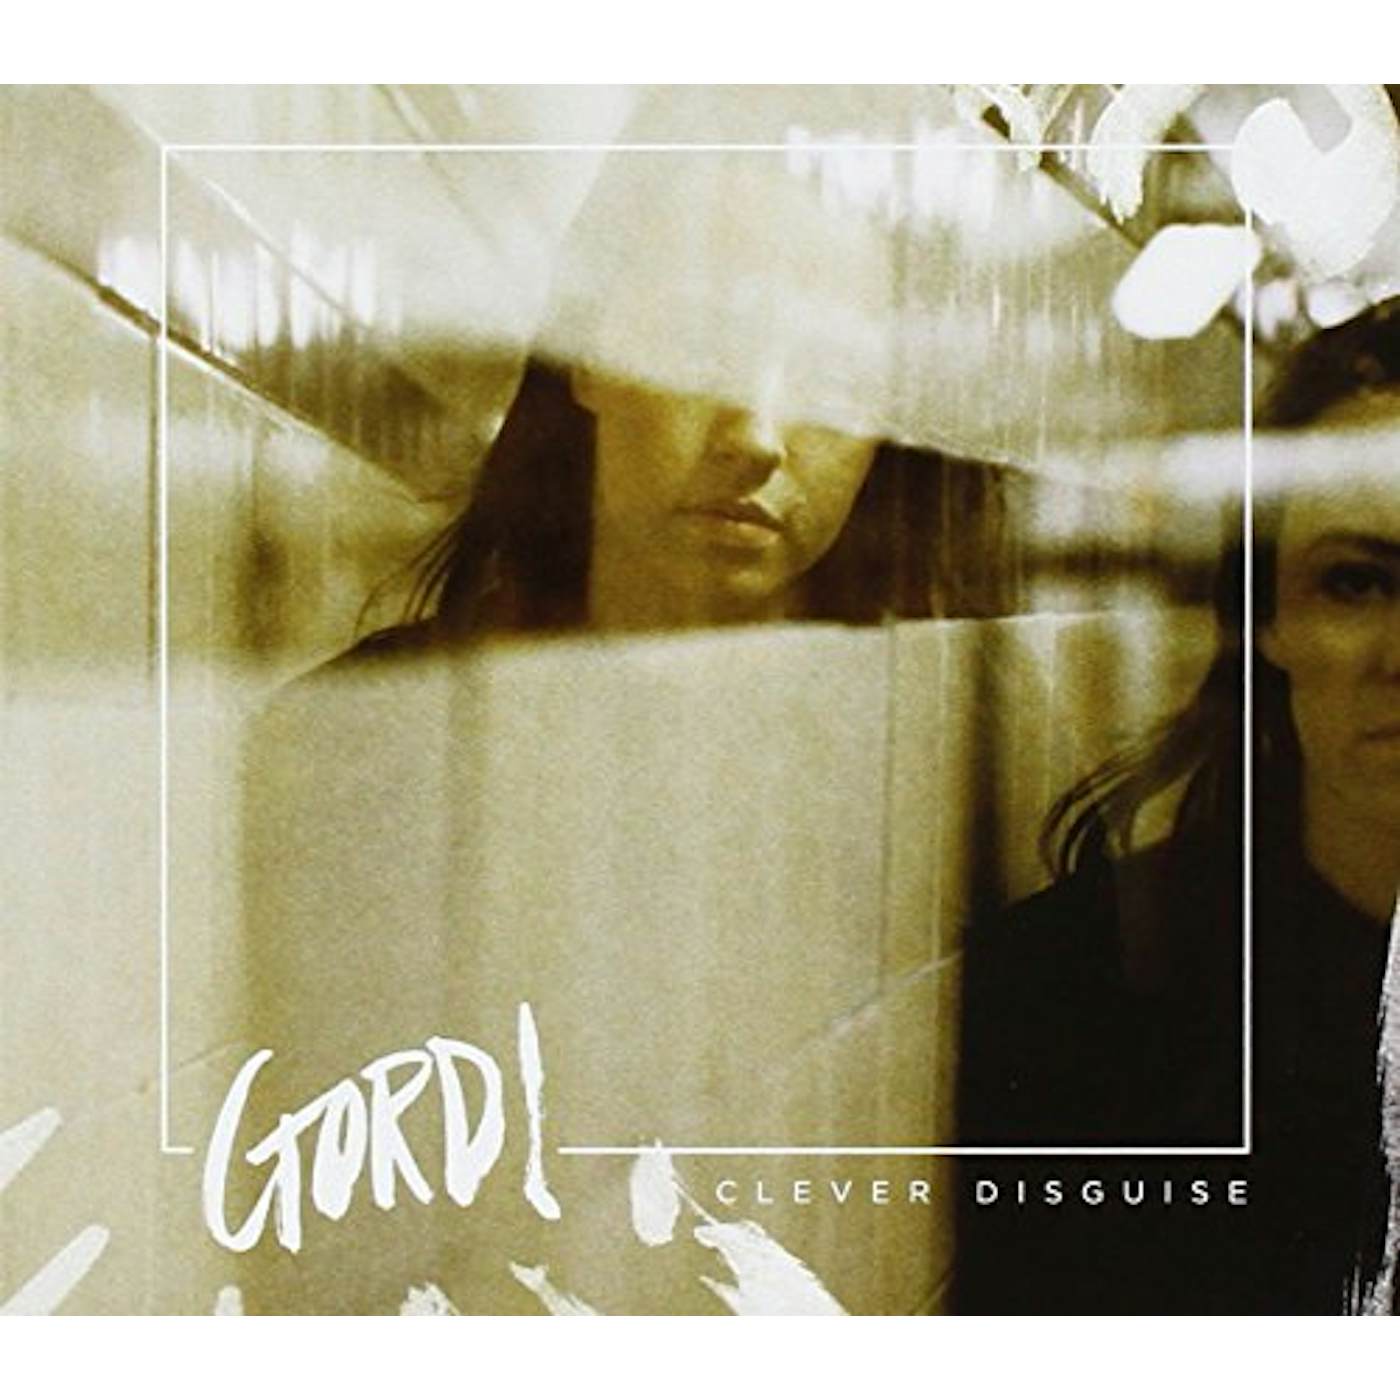 Gordi CLEVER DISGUISE CD